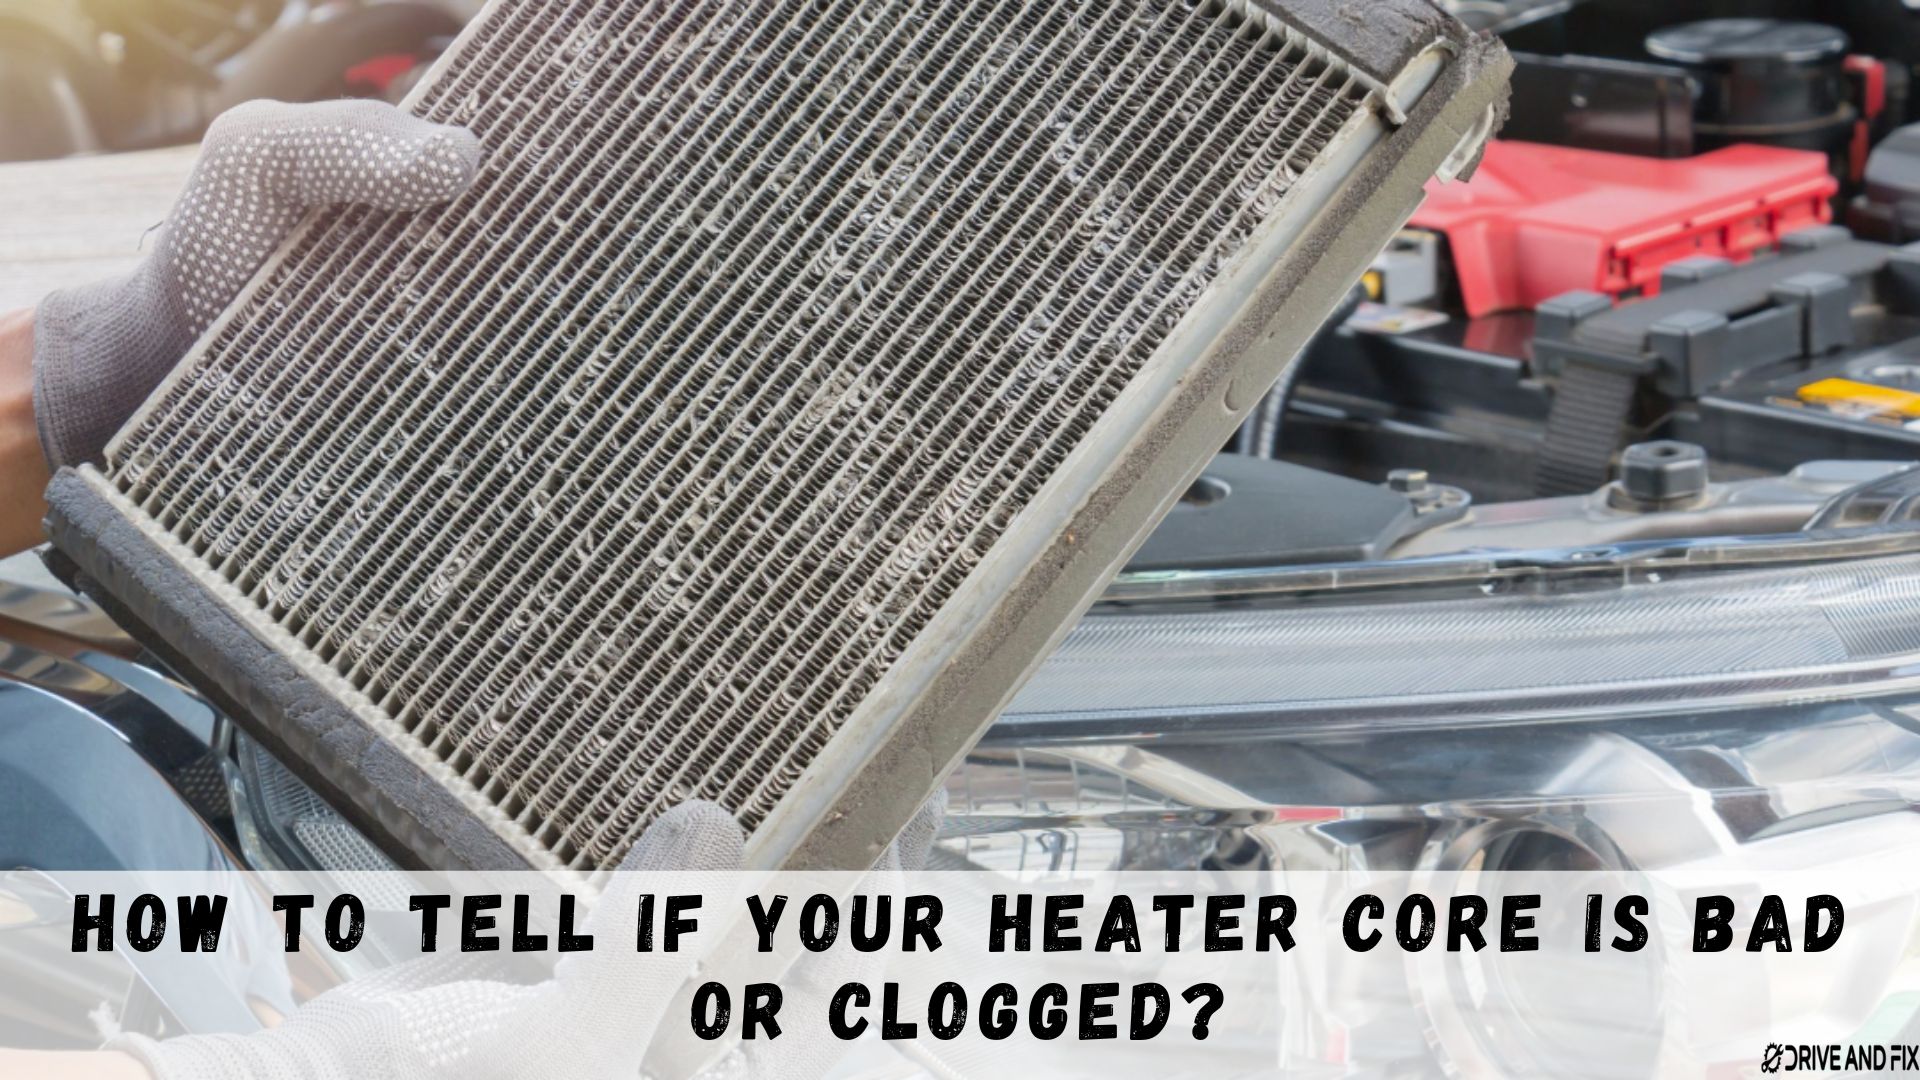 How To Tell If Your Heater Core Is Bad Or Clogged?